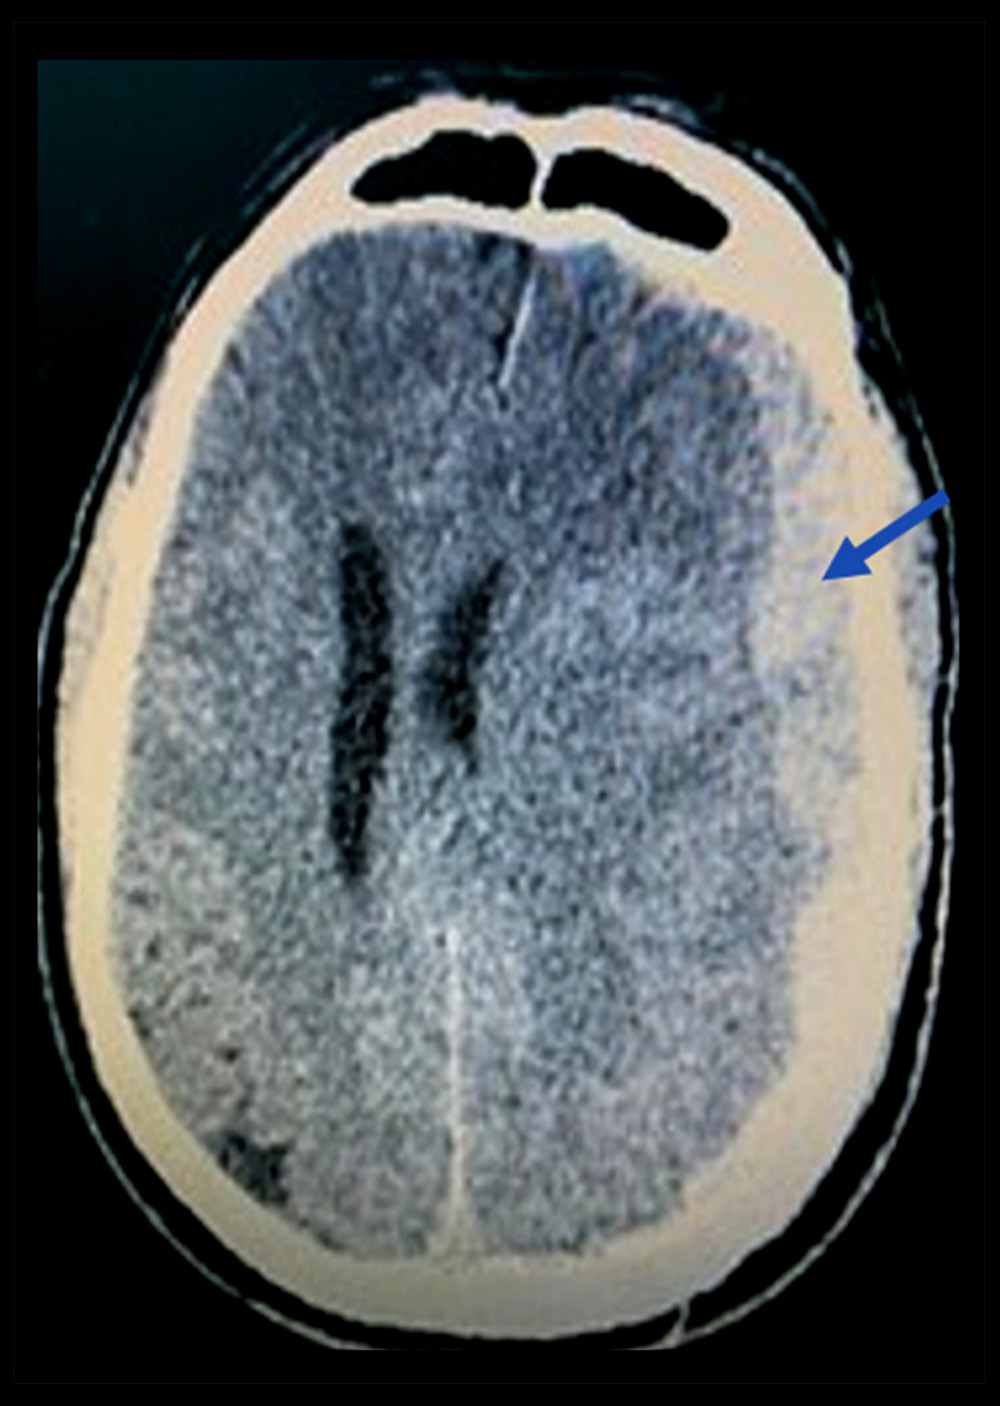 Initial CT brain (7 h from initial symptoms) showing extra-axial collection. Description: left-sided extra-axial hyperdensity 2 cm in maximum thickness (pointed in the image) with mass effect and midline shift 1.4 cm, left uncal herniation, and effacement of cortical sulci and left lateral ventricle.